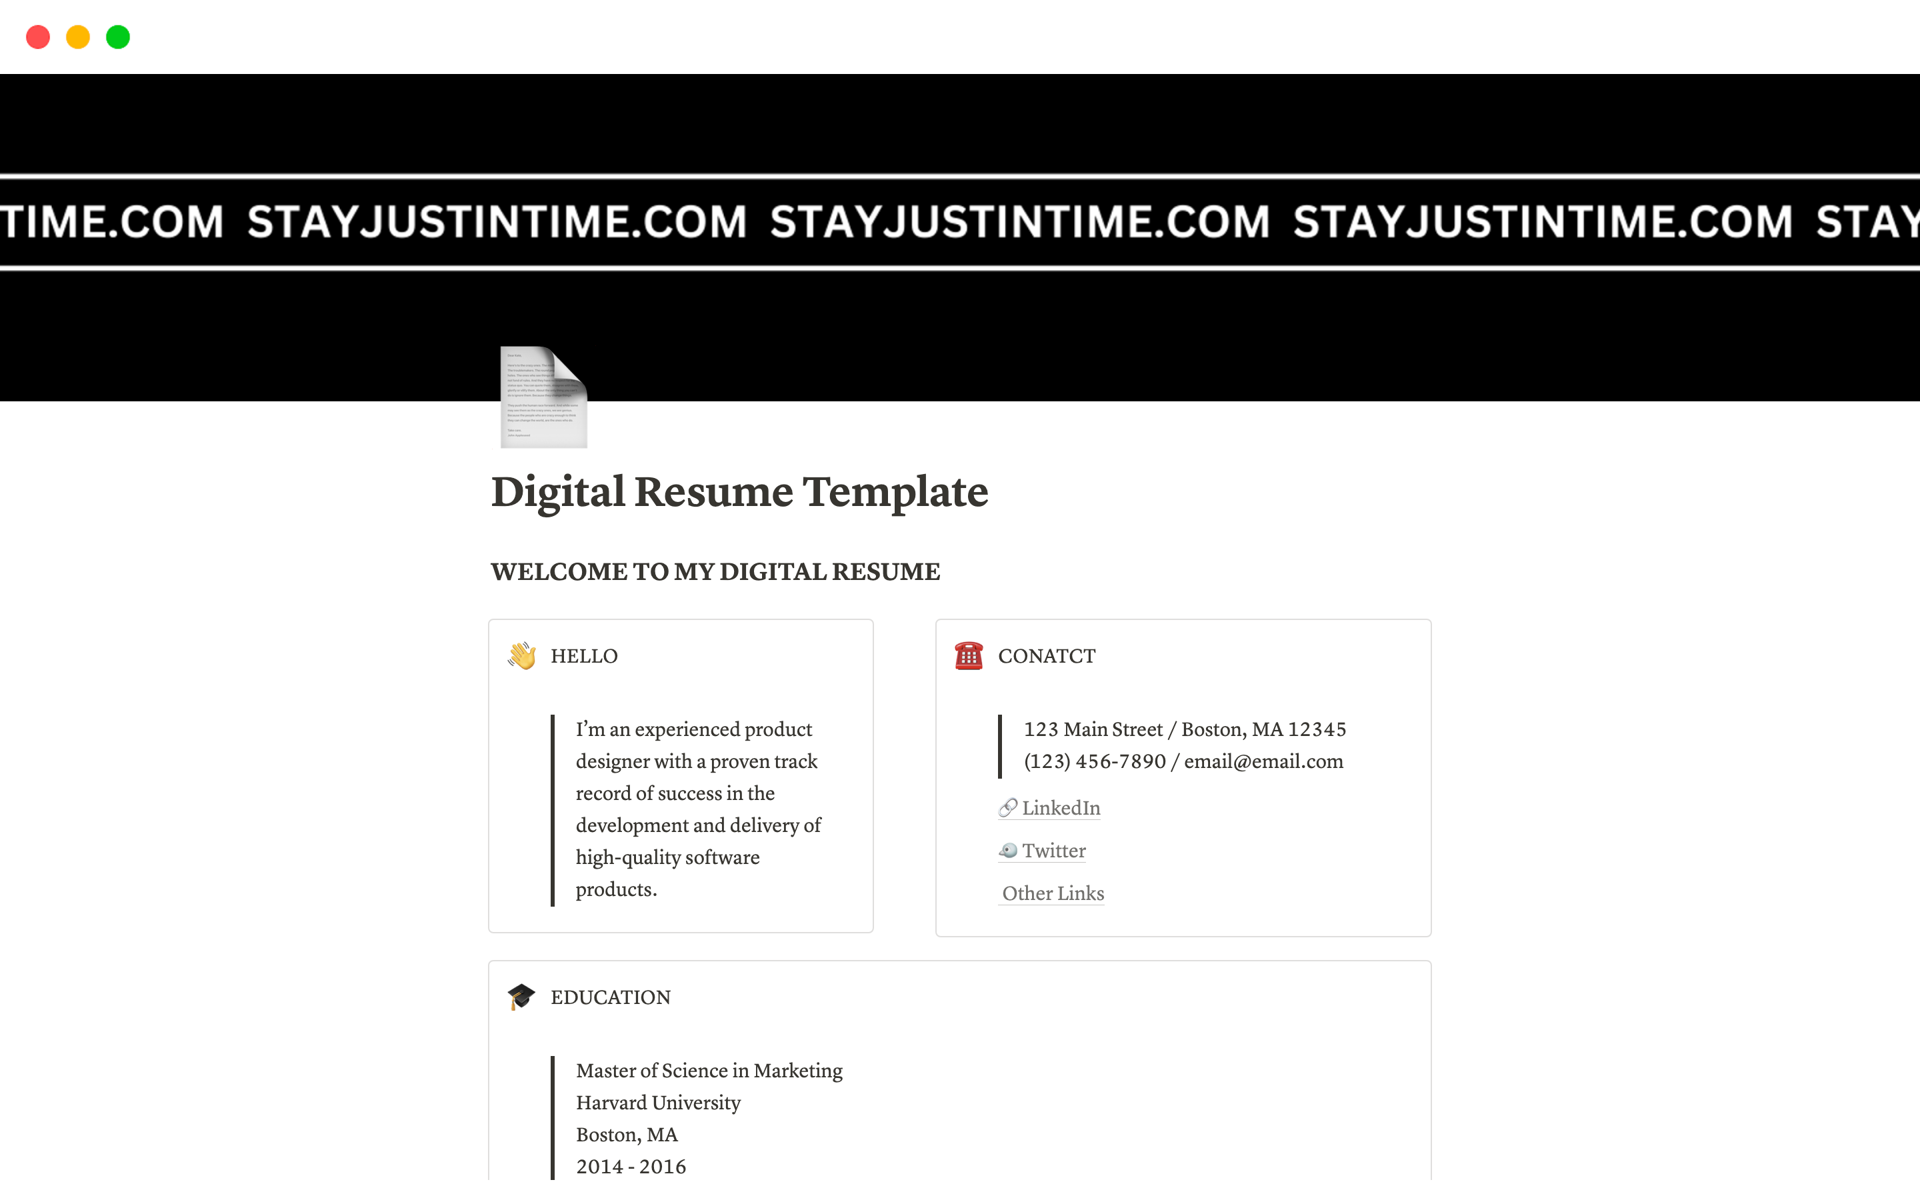 Showcase your professional journey with our sleek digital resume notion template.